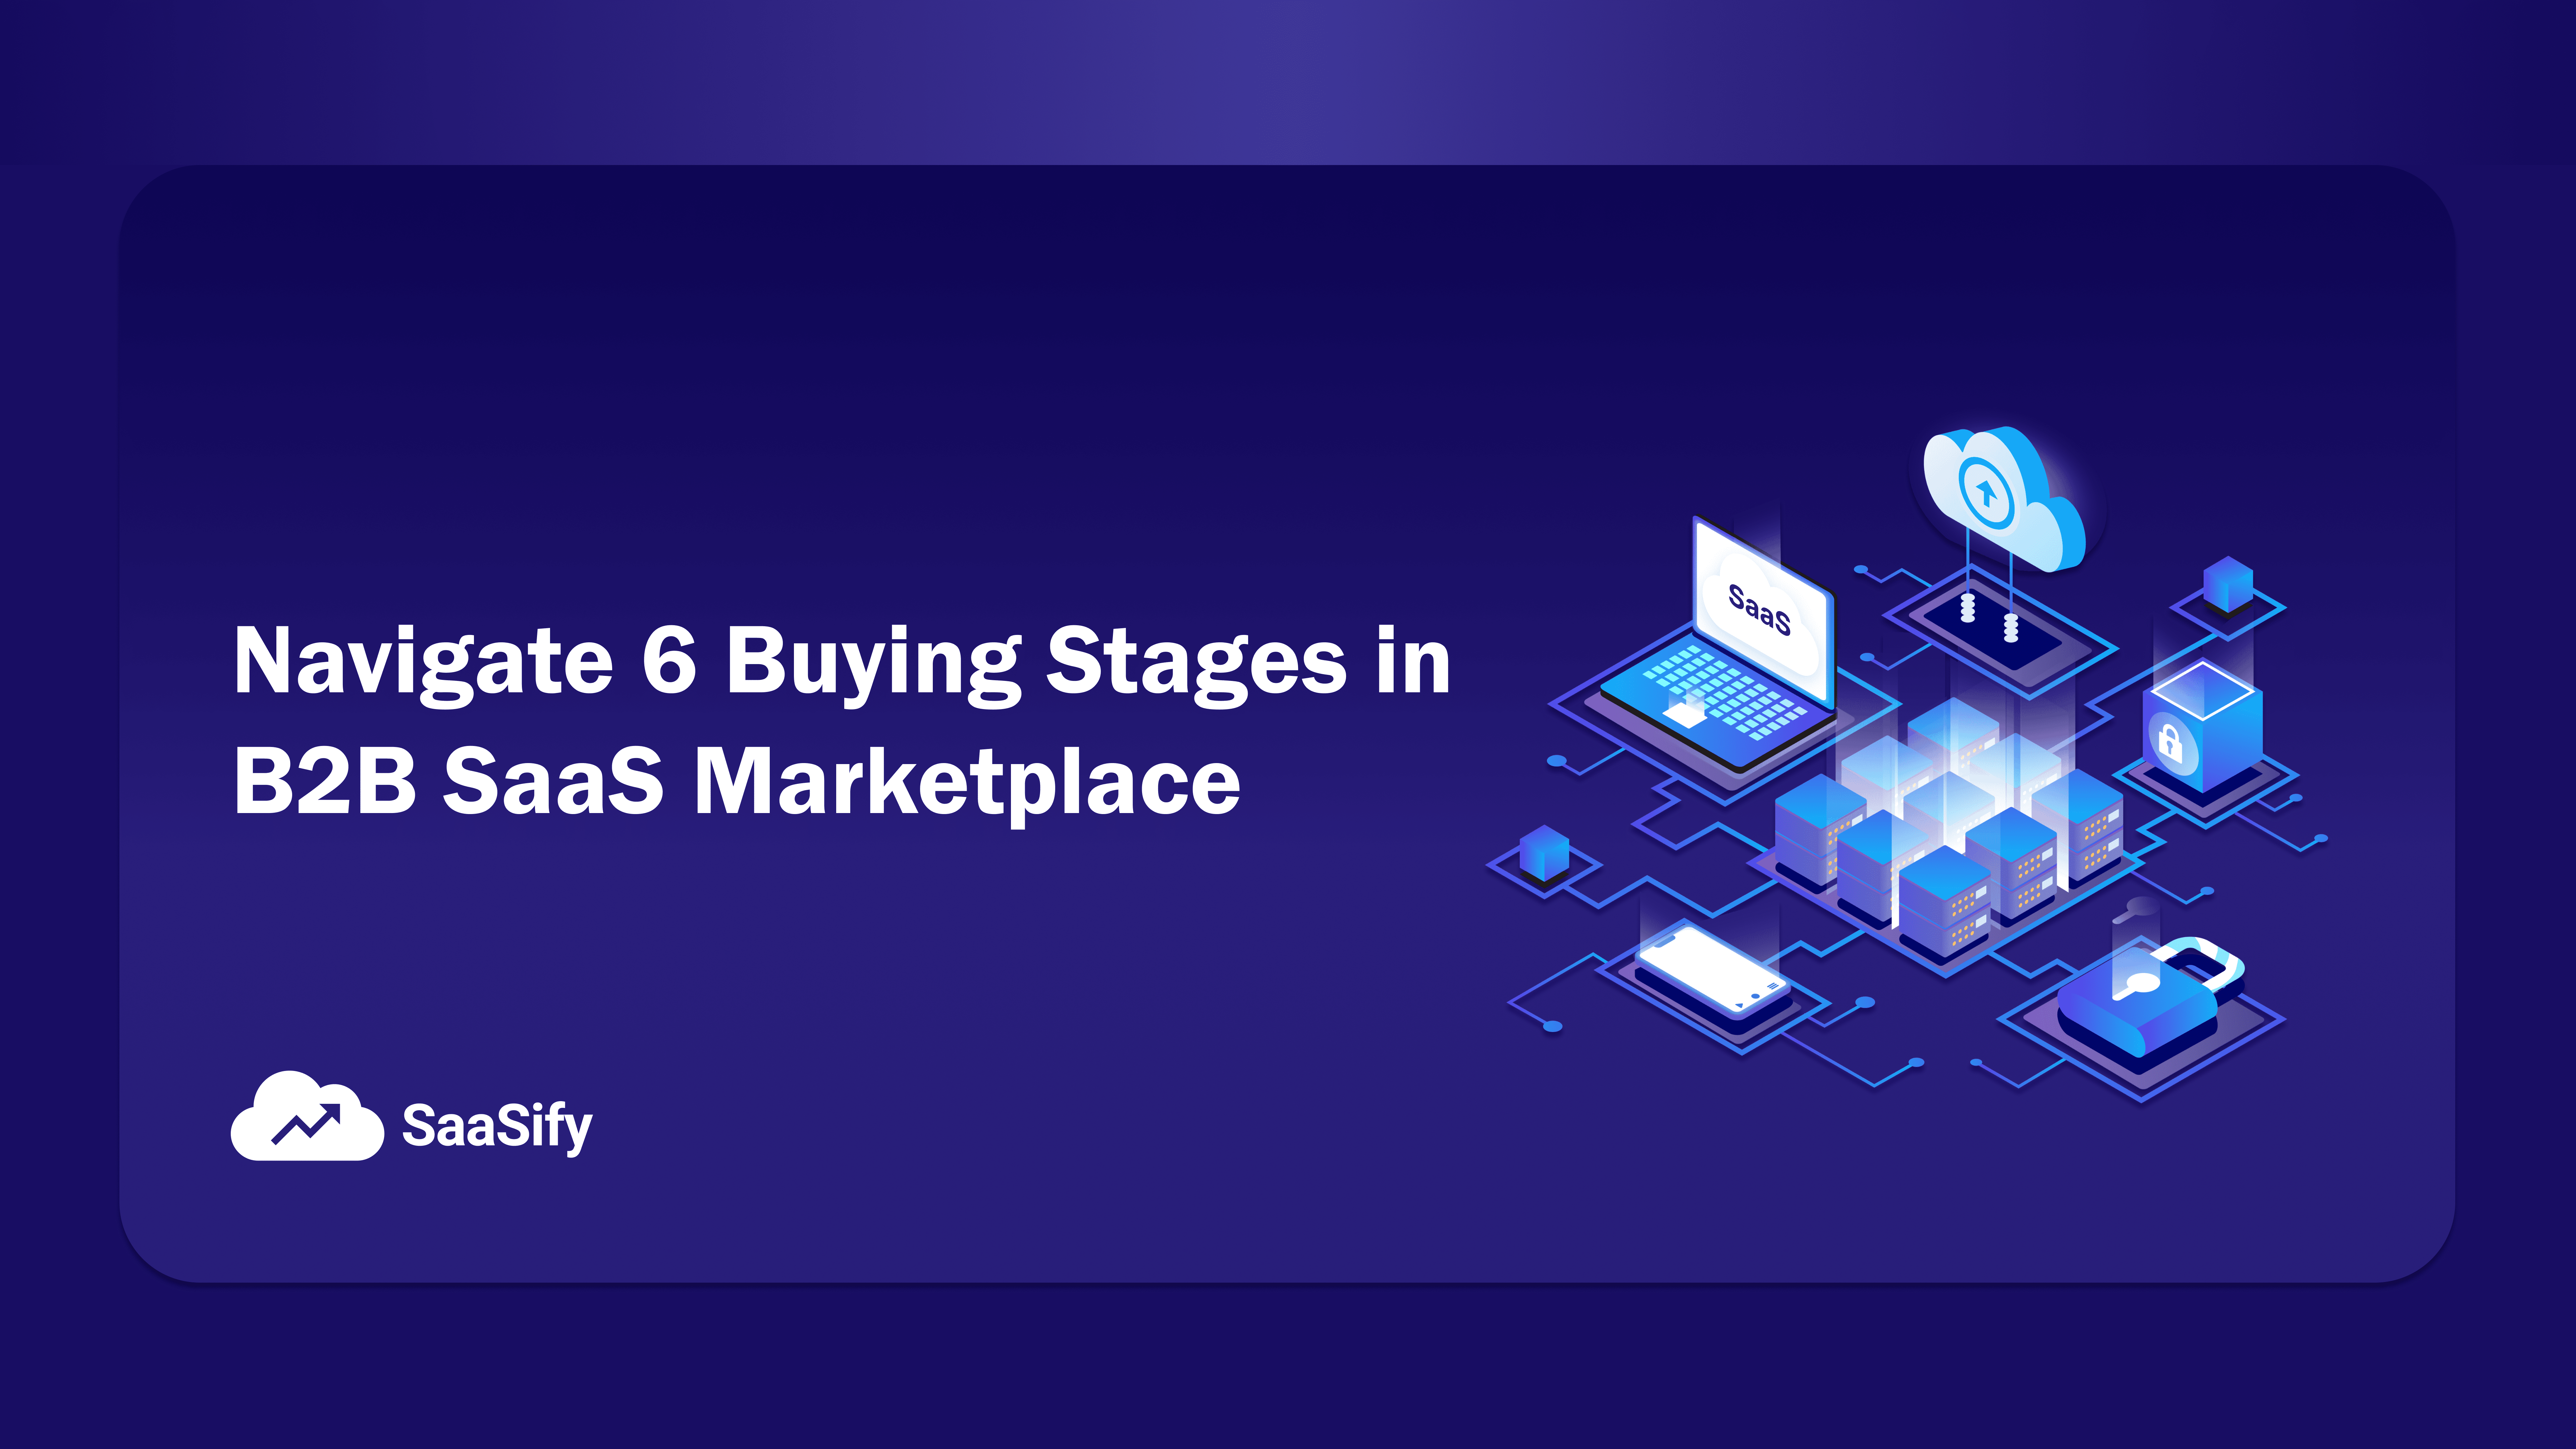 B2B SaaS Marketplace: Best practices to navigate the 6 buying stages for success